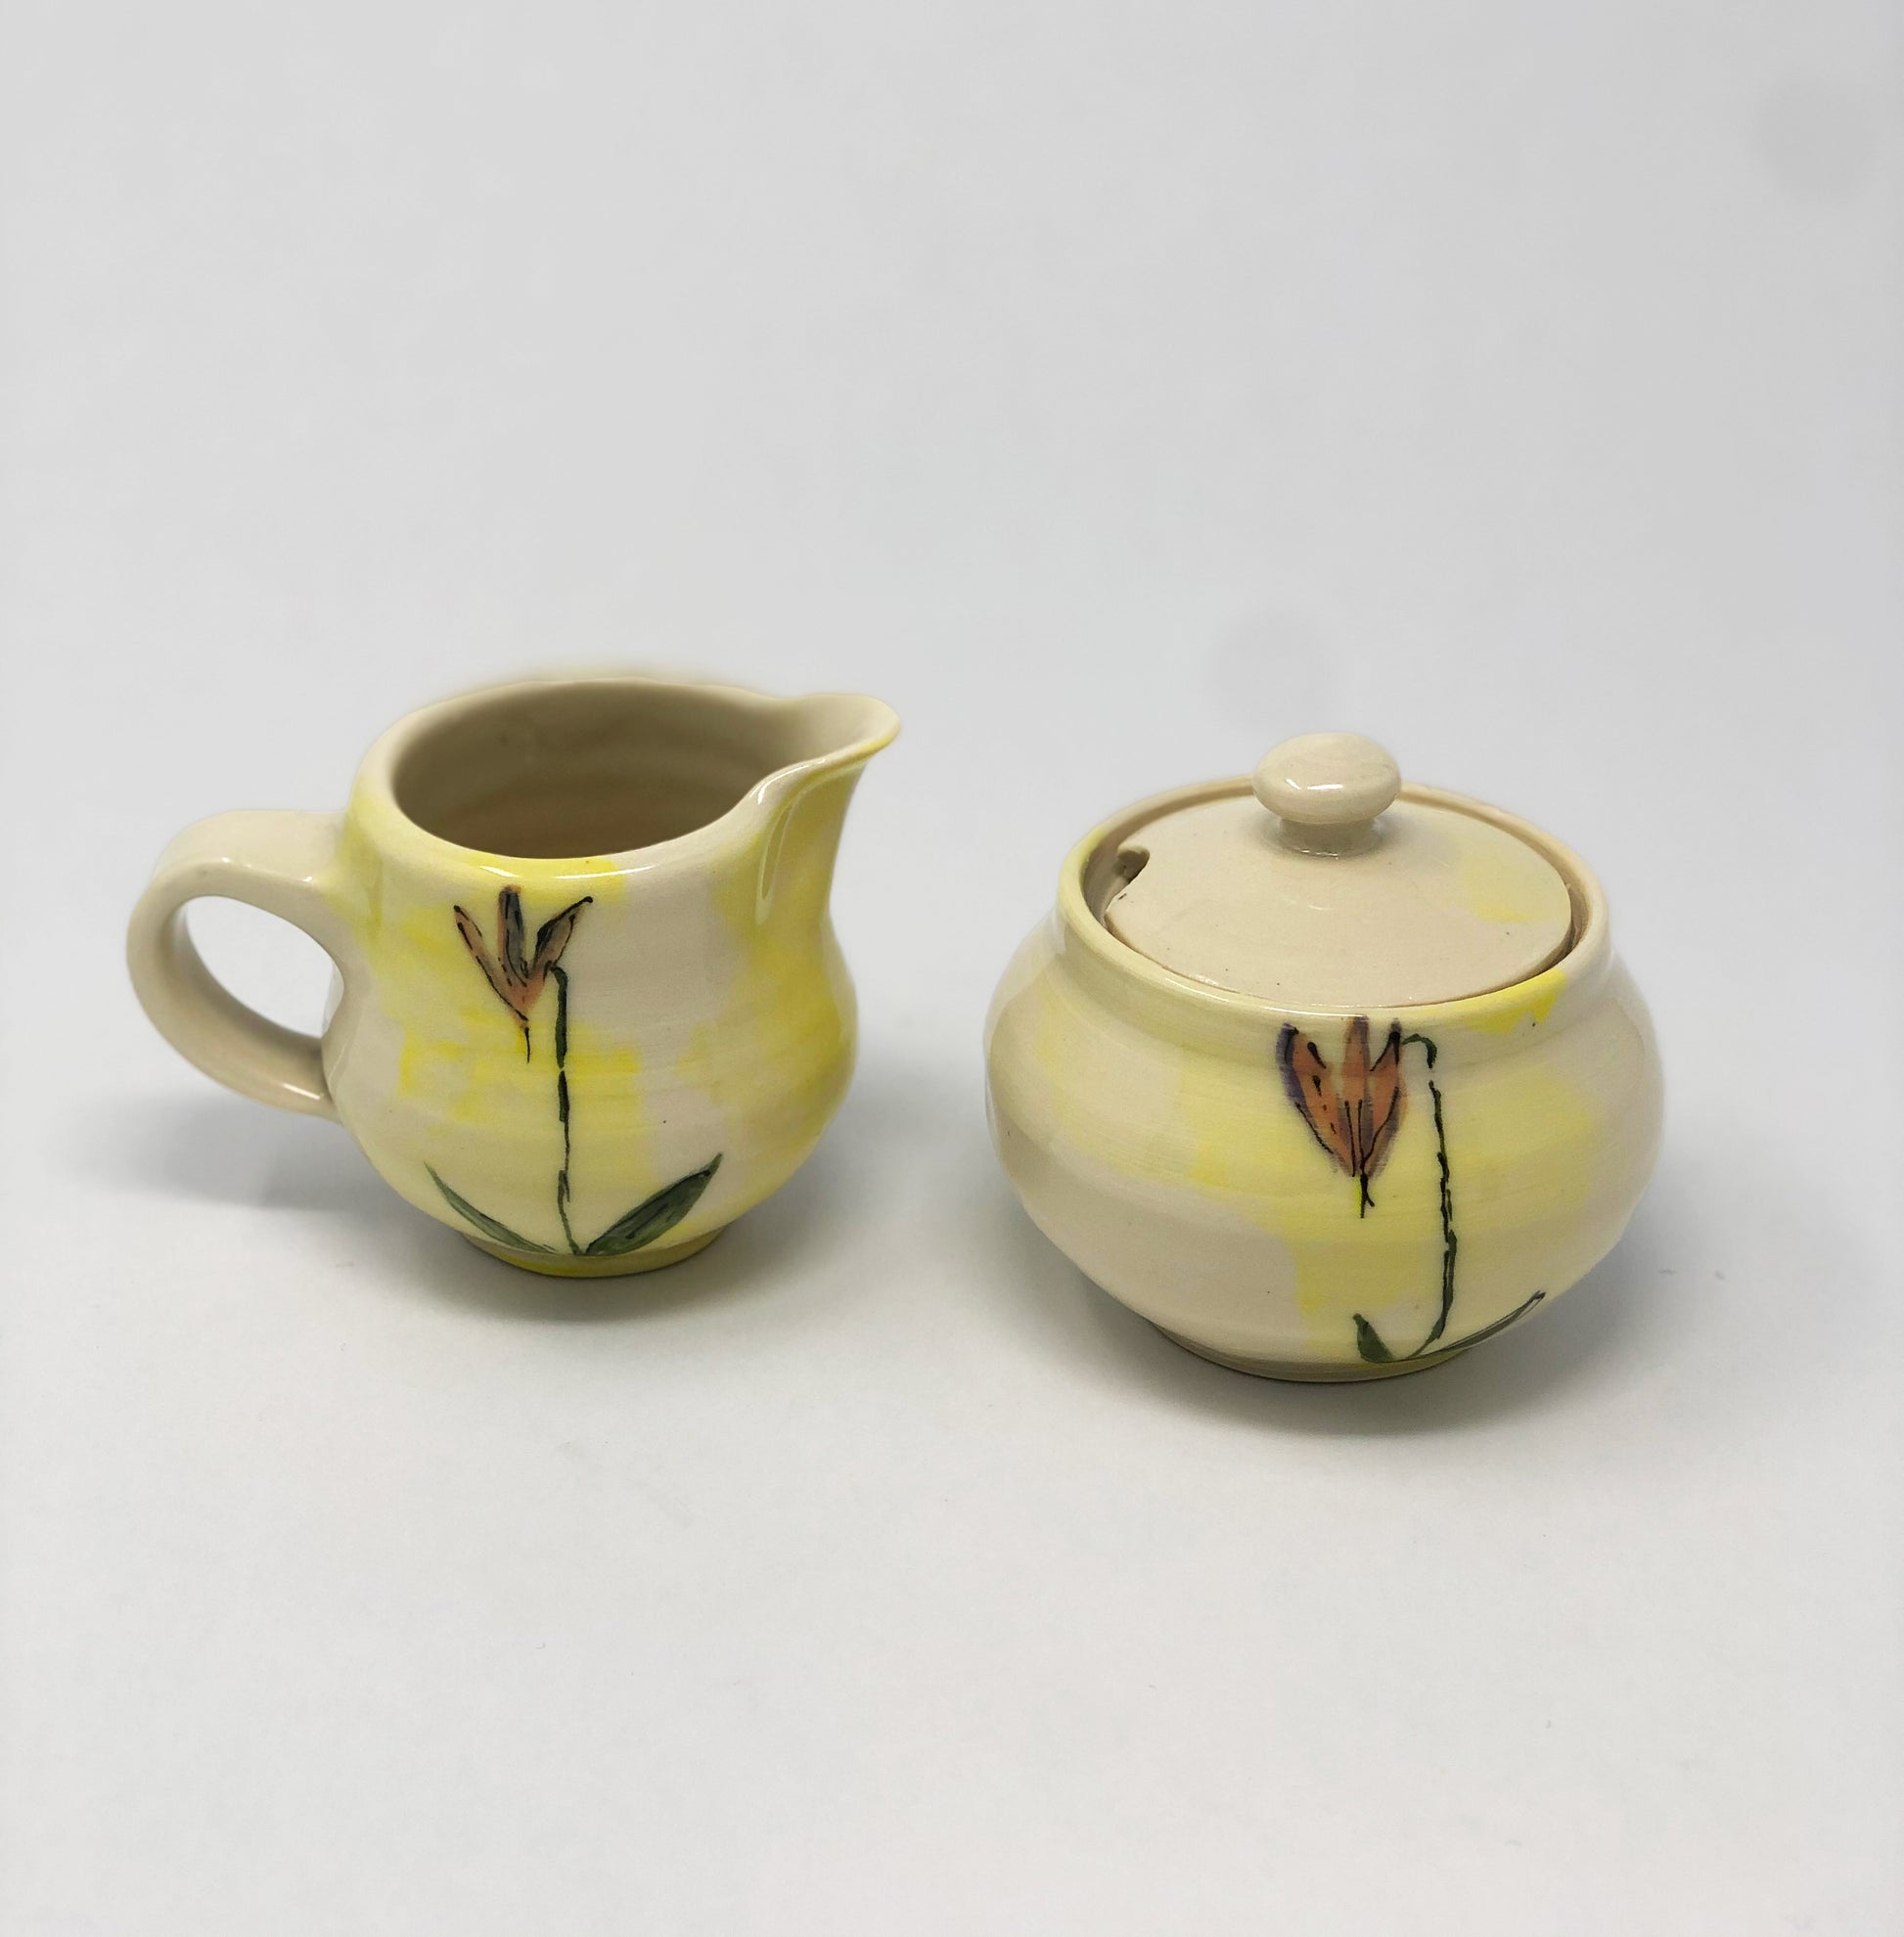 Sugar bowl and creamer set. Hand thrown porcelain with yellow wash. Wyoming native flower Shooting Star hand painted on the sides. Spoon slot in sugar bowl lid.